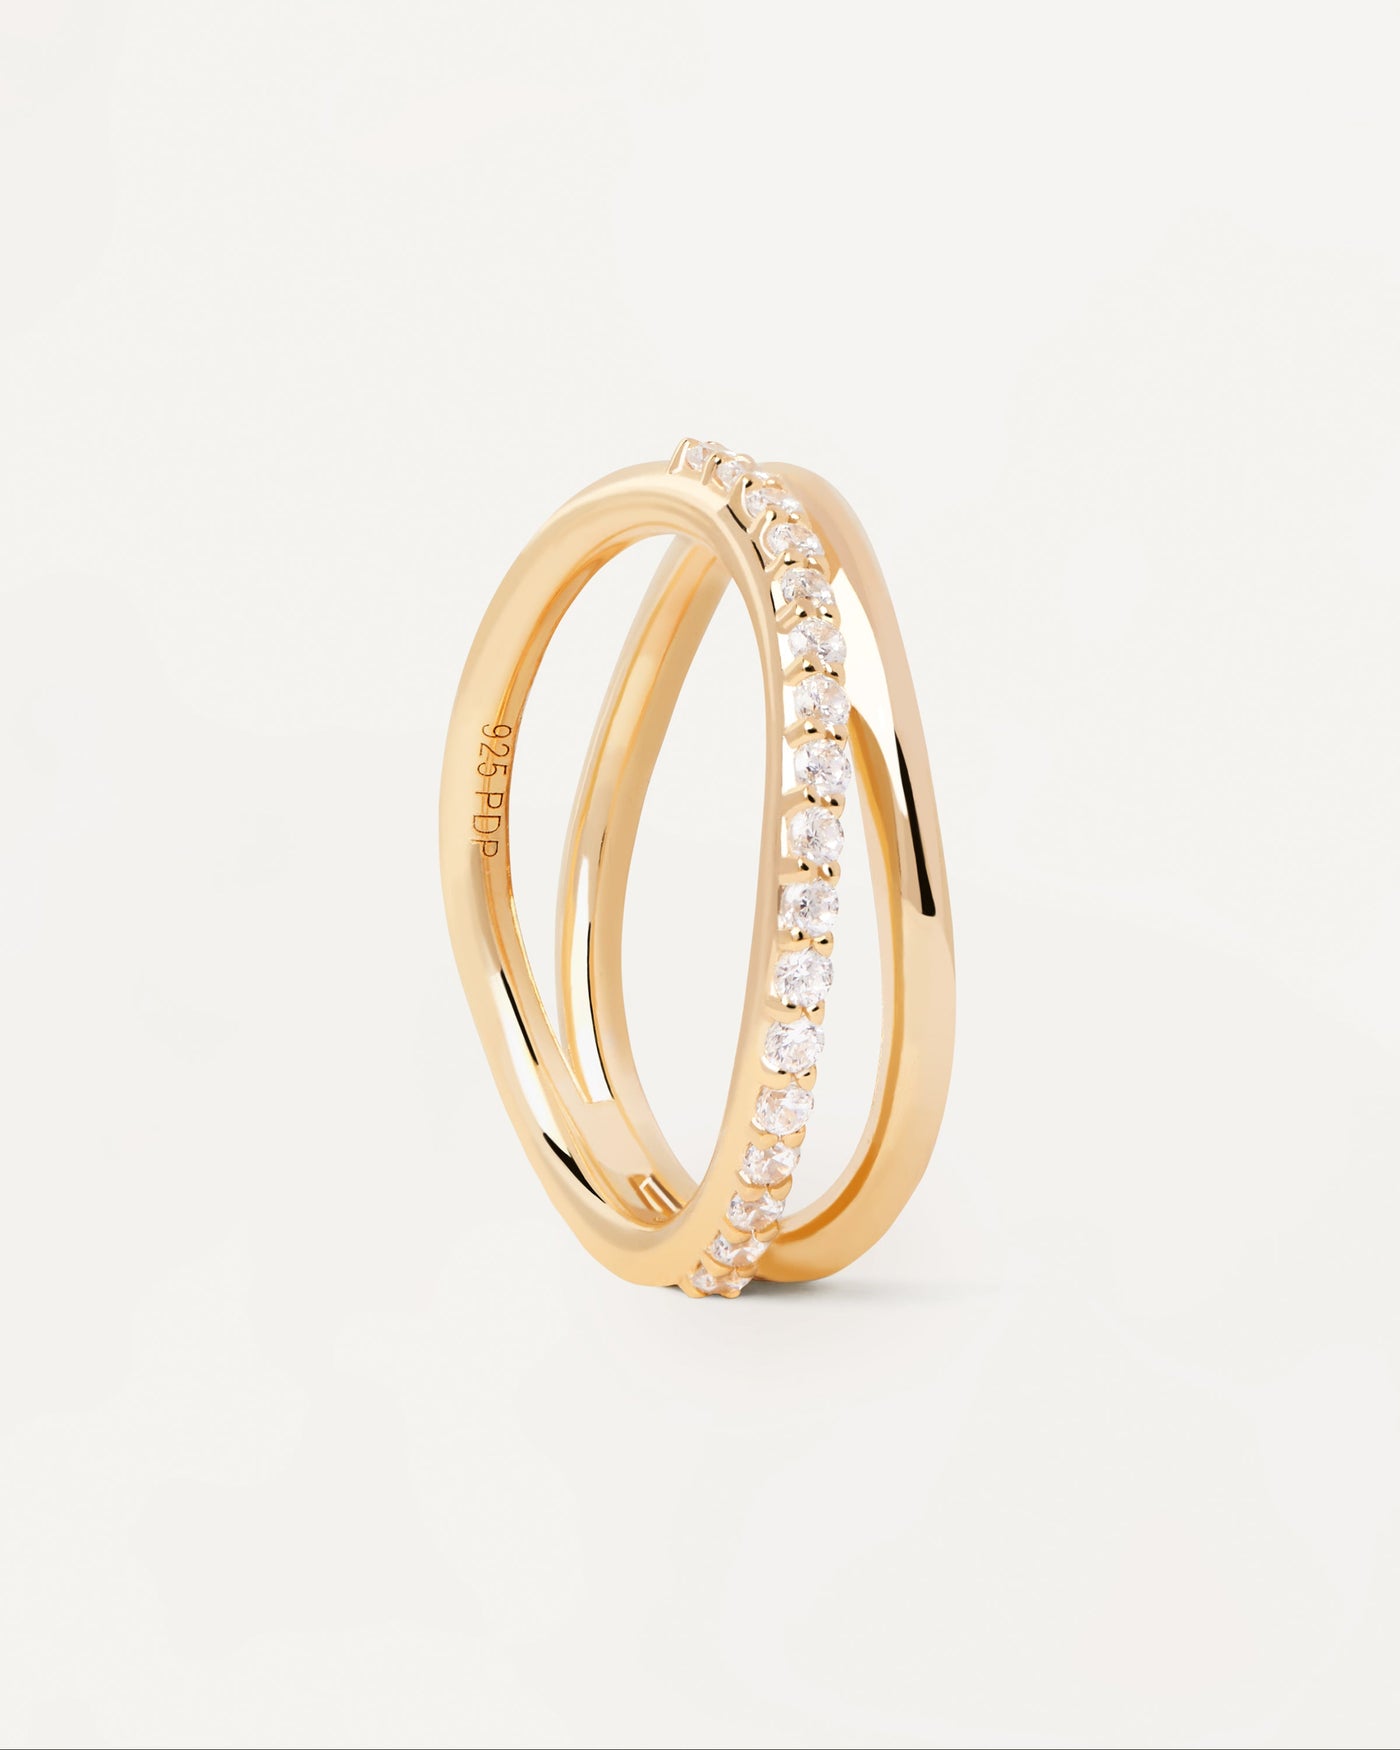 2023 Selection | Twister Ring. Gold-plated ring with 2 wavy bands: plain and a zirconia eternity band. Get the latest arrival from PDPAOLA. Place your order safely and get this Best Seller. Free Shipping.